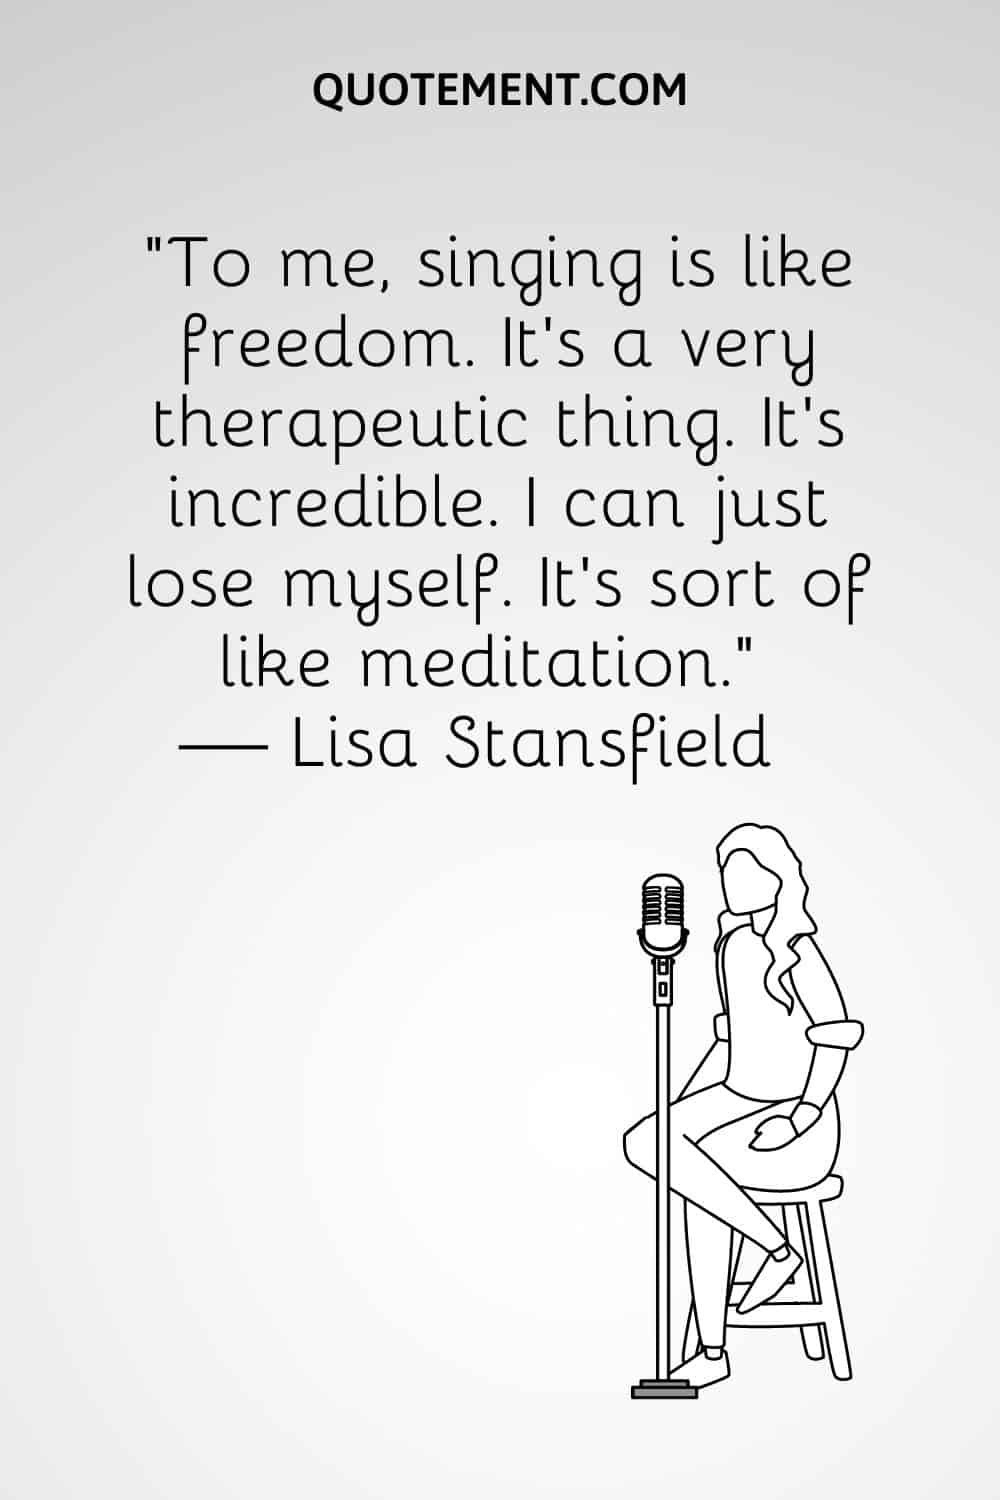 “To me, singing is like freedom. It's a very therapeutic thing. It's incredible. I can just lose myself. It's sort of like meditation.” — Lisa Stansfield